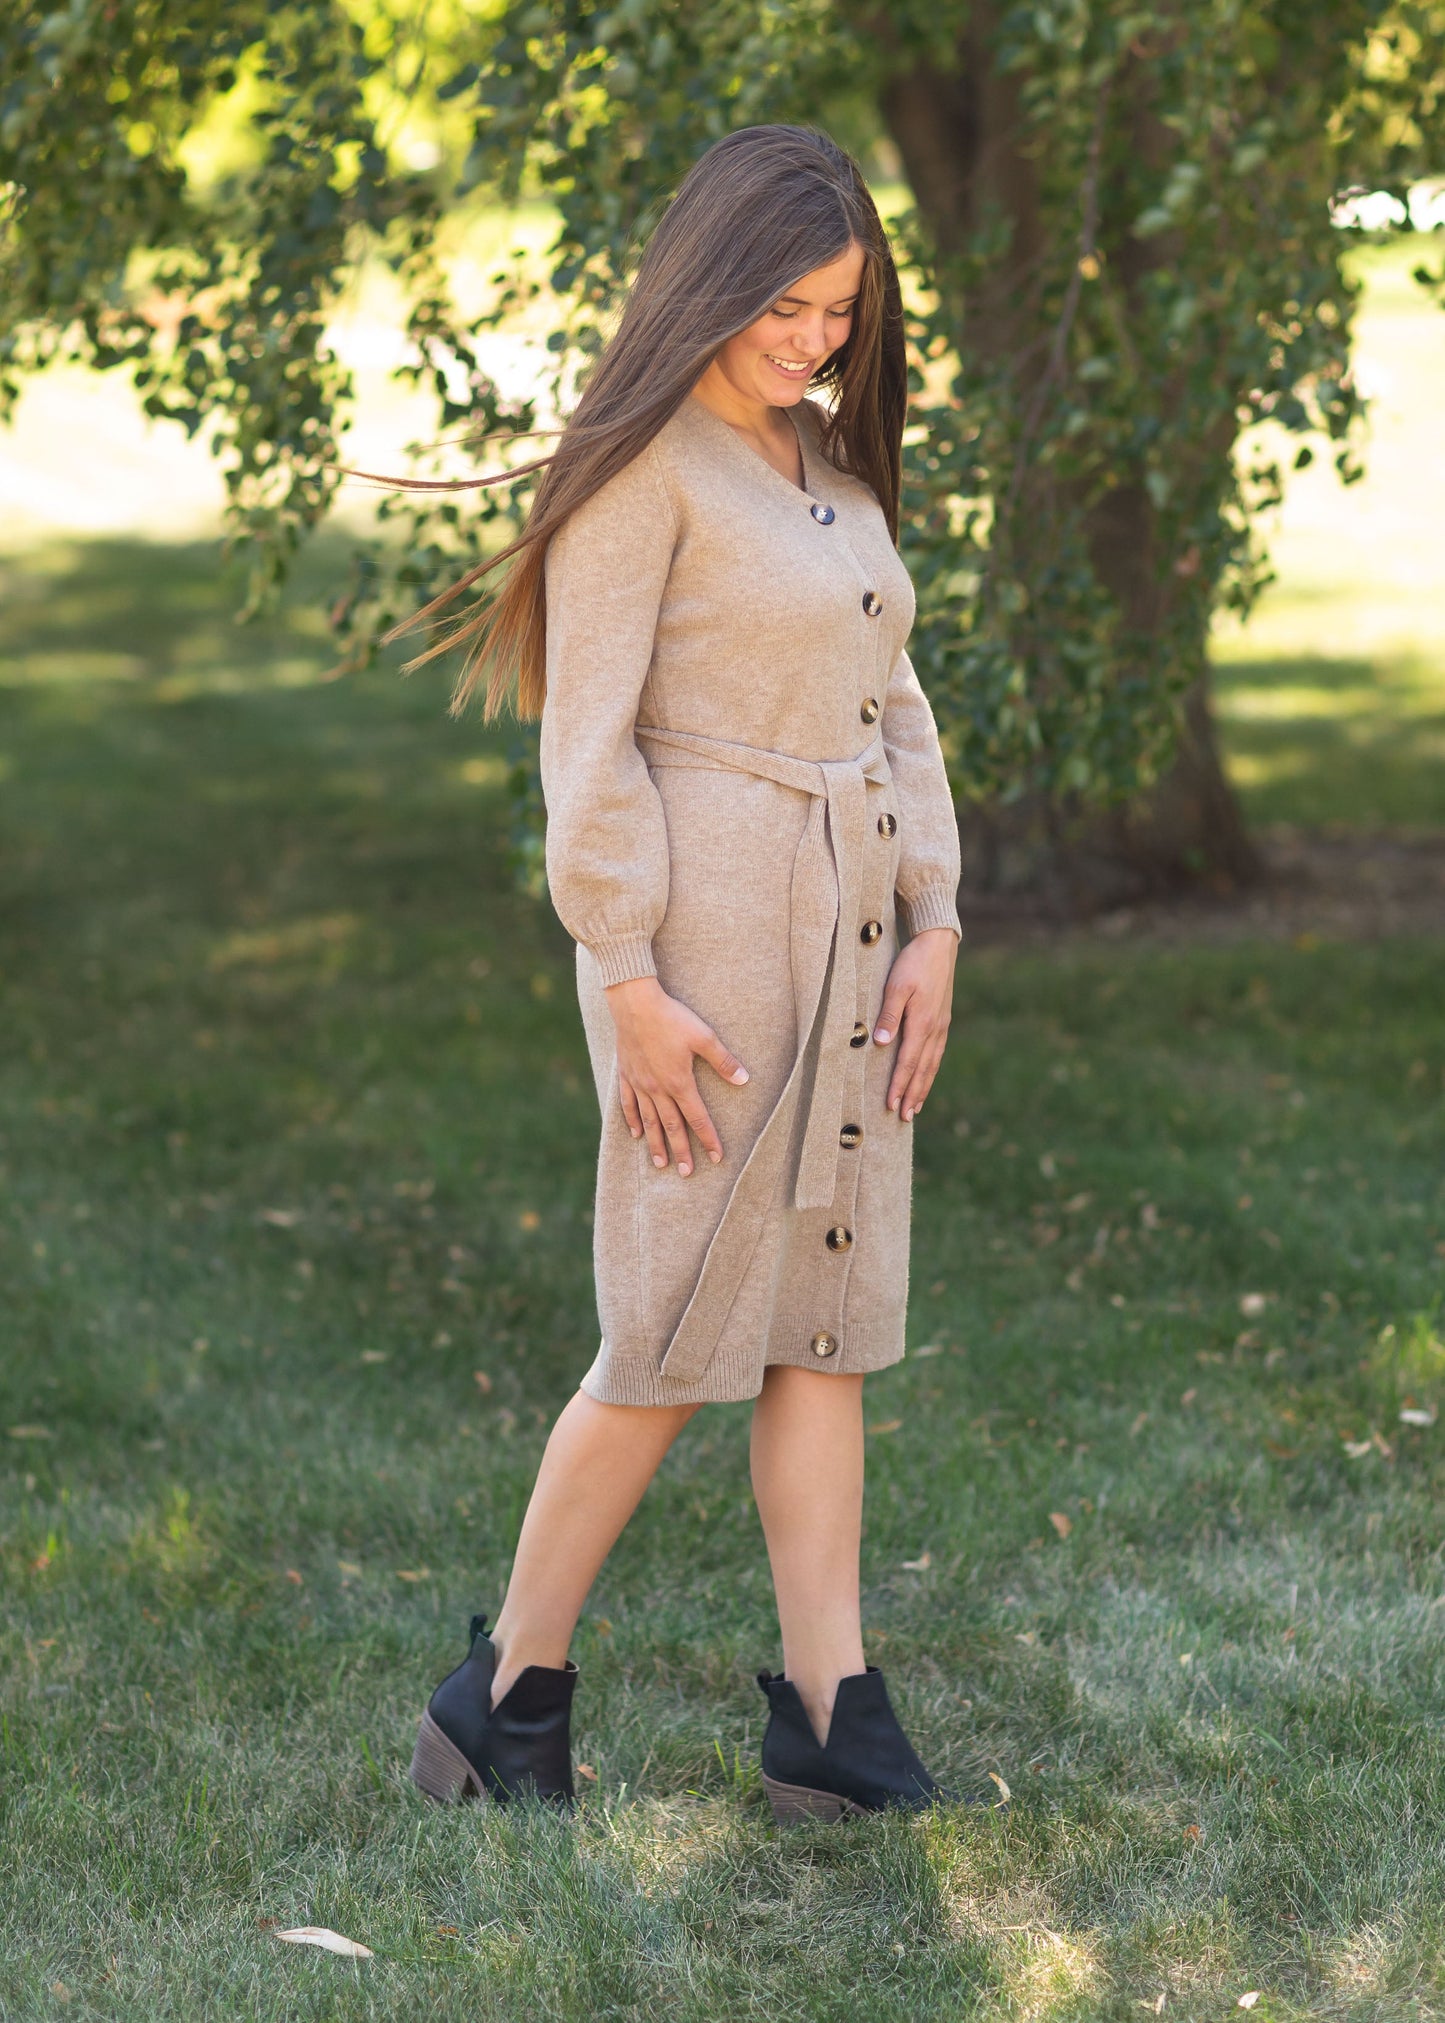 Made with a premium, high quality knit fabric, the Inherit Exclusive Lauren Button up Sweater Dress is a mid-weight dress/cardigan you'll love for the cool weather seasons. If you choose to wear this as a dress, you'll have a modest v-neckline for a flattering look! The tortoise shell buttons cascade down the front and are all functioning which makes this nursing friendly and the detachable belt makes this a versatile option for styling!